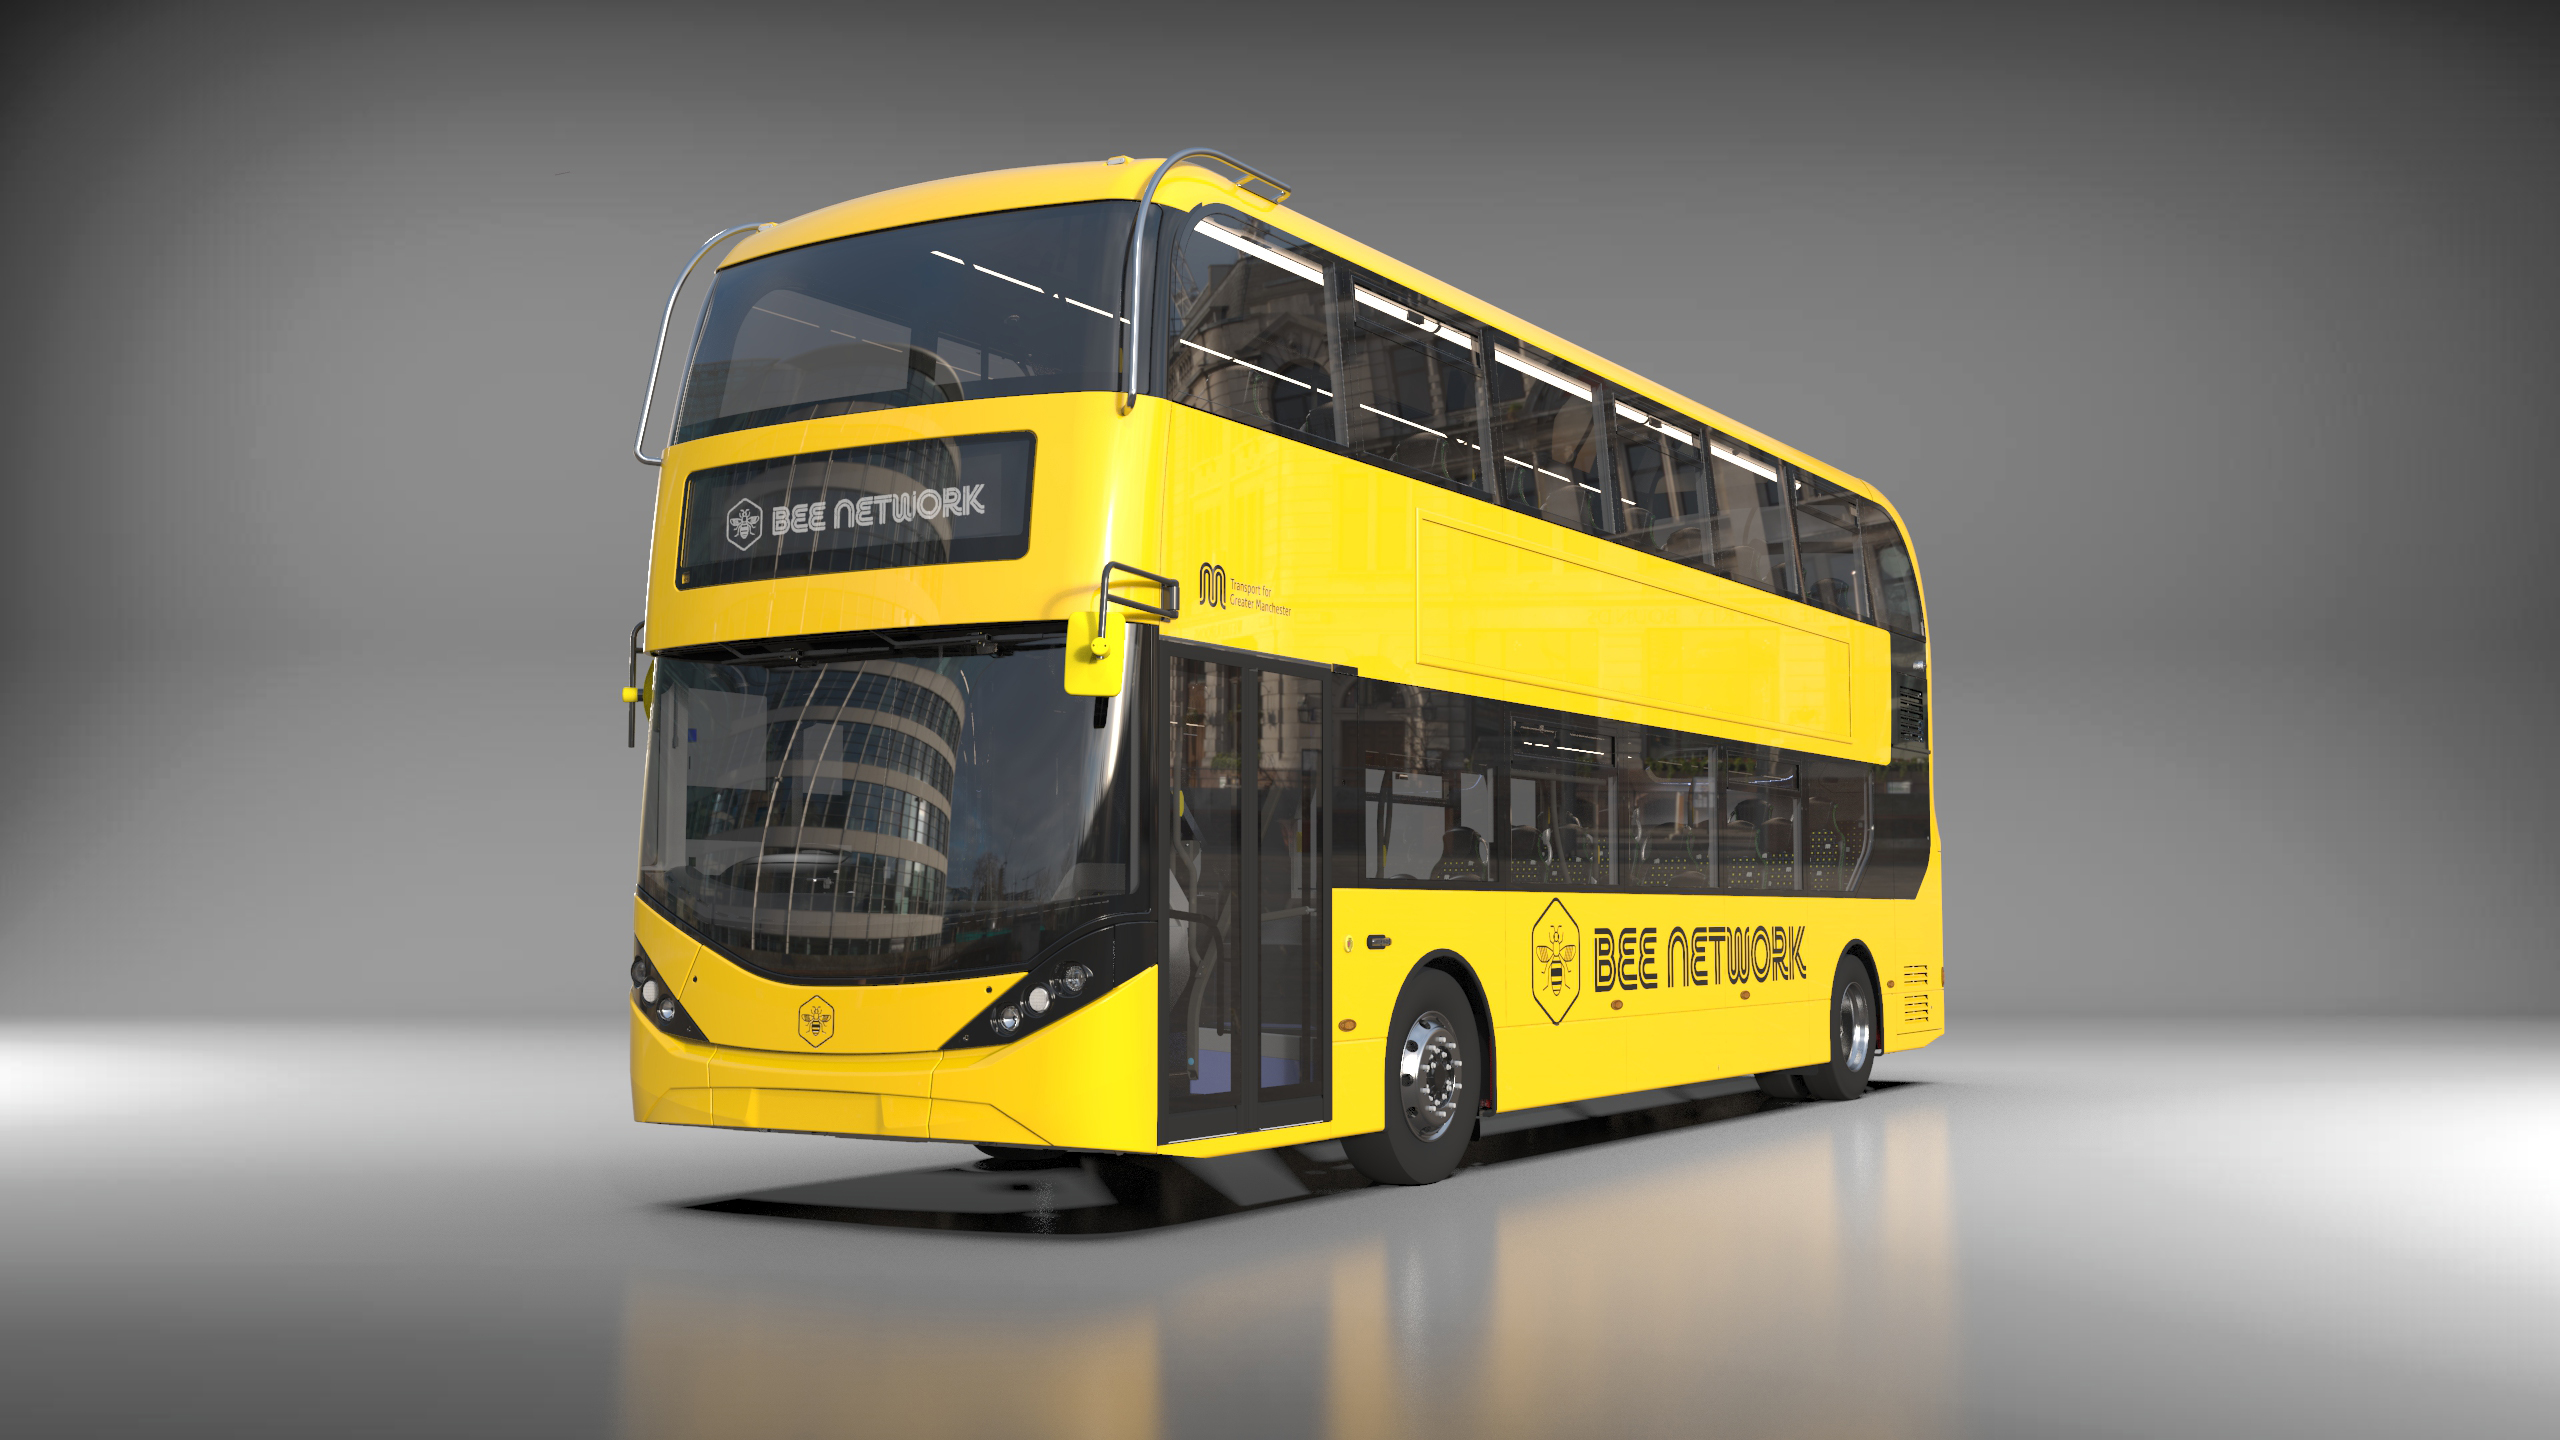 ADL to provide 50 zero-emission buses for Bee Network